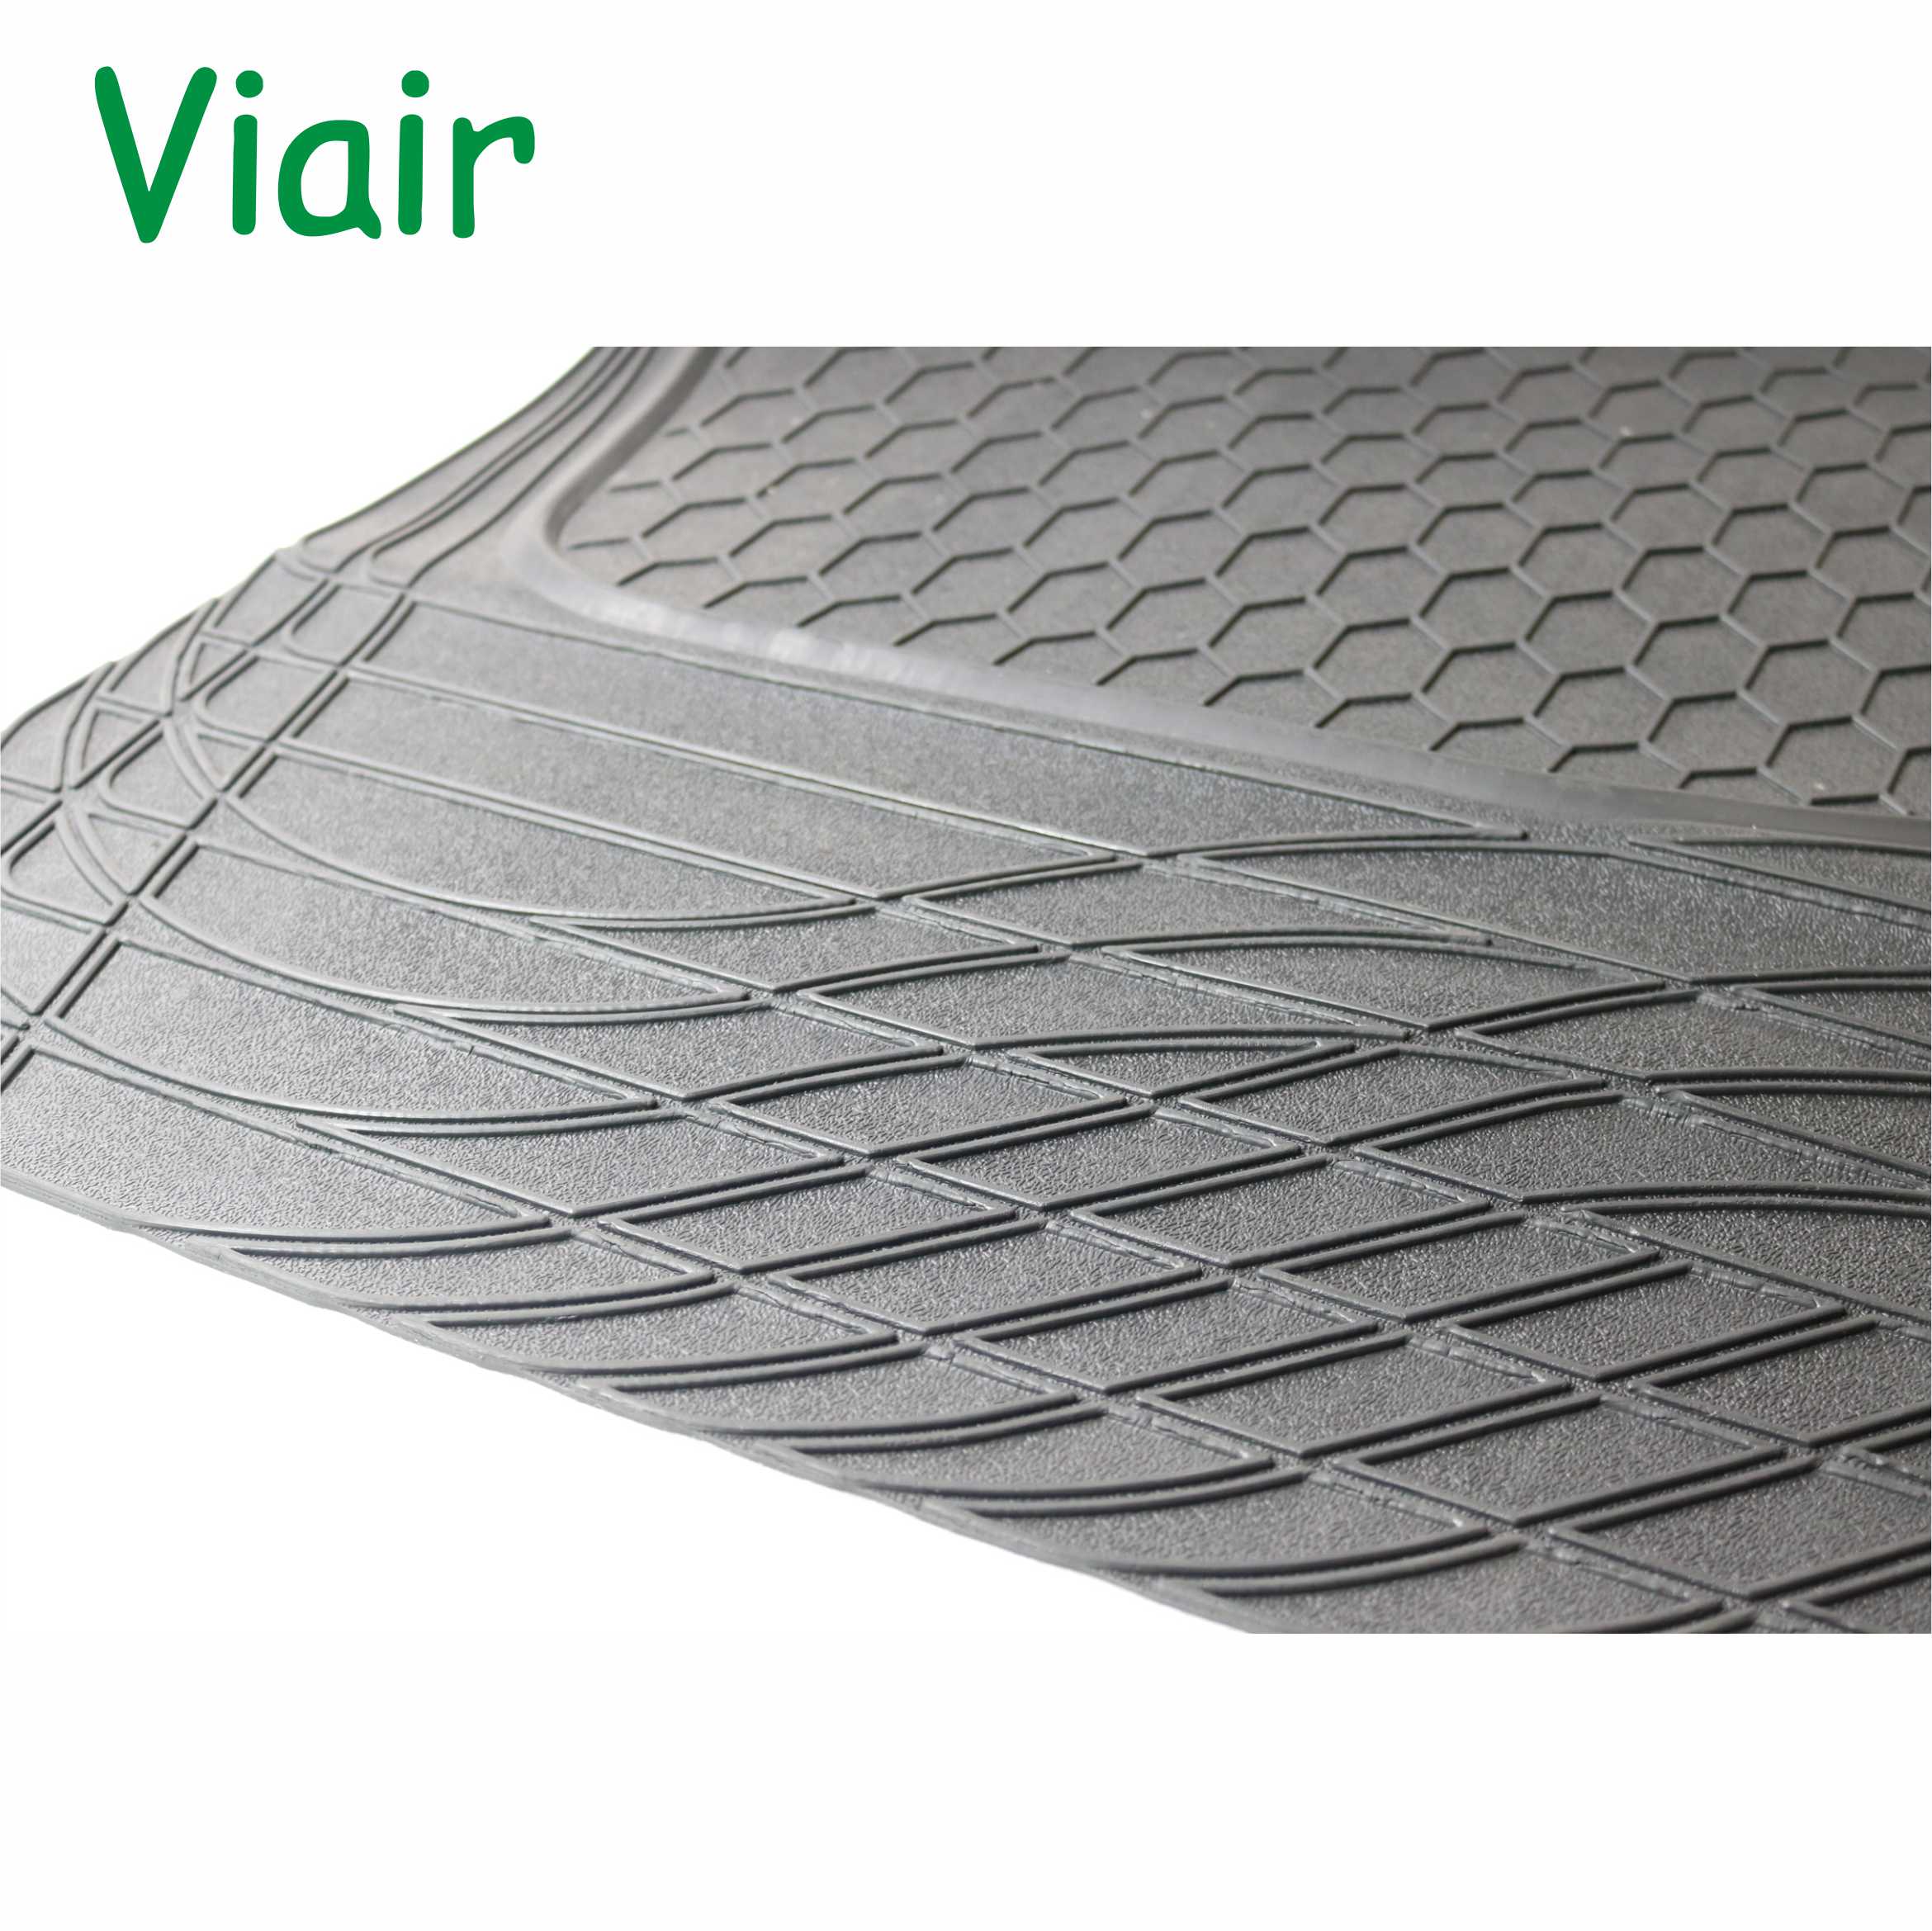 universal car mats floor Excellent quality low price Quick Delivery waterproof pvc car mat